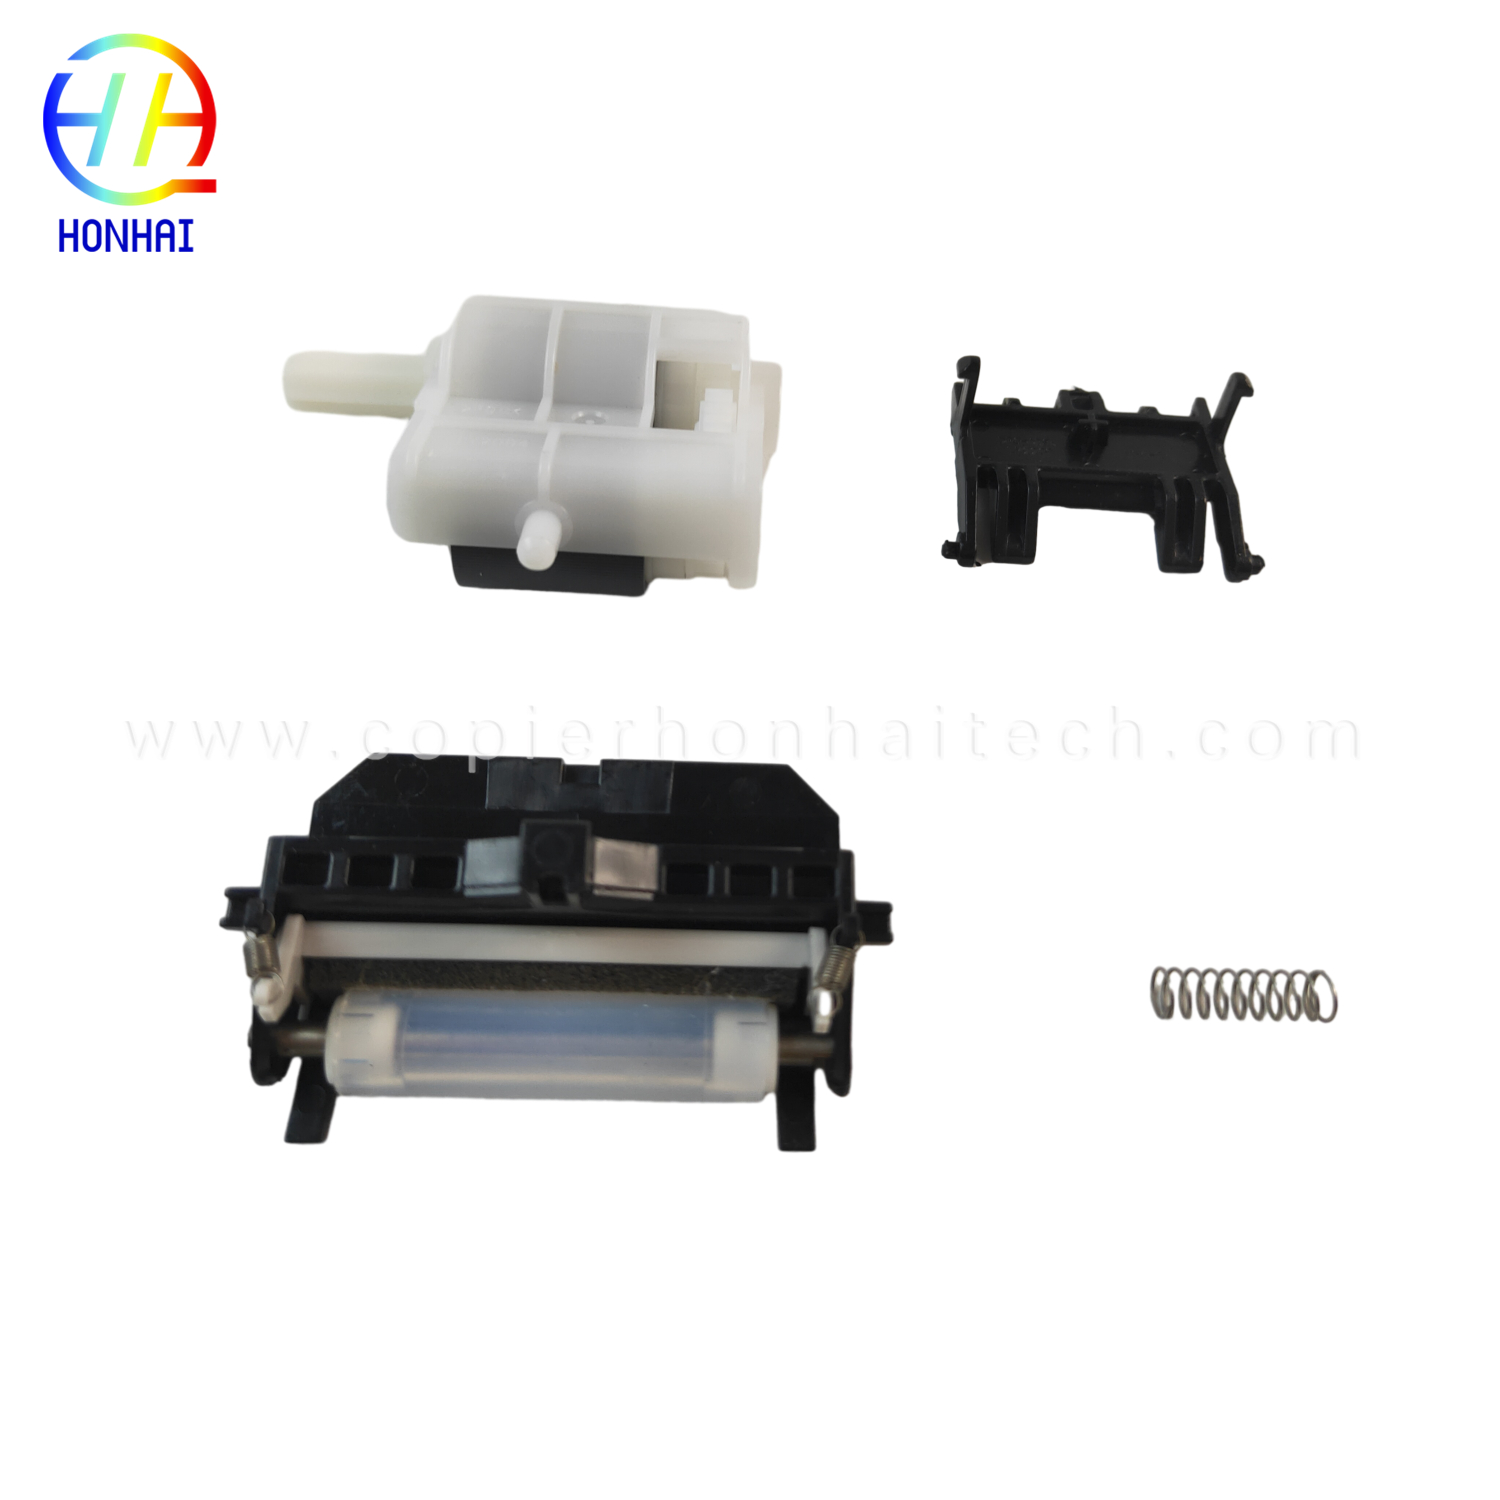 https://www.copierhonhaitech.com/pickup-feed-assemblies-and-separation-pad-kit-for-brother-dcp-l2540dw-product/